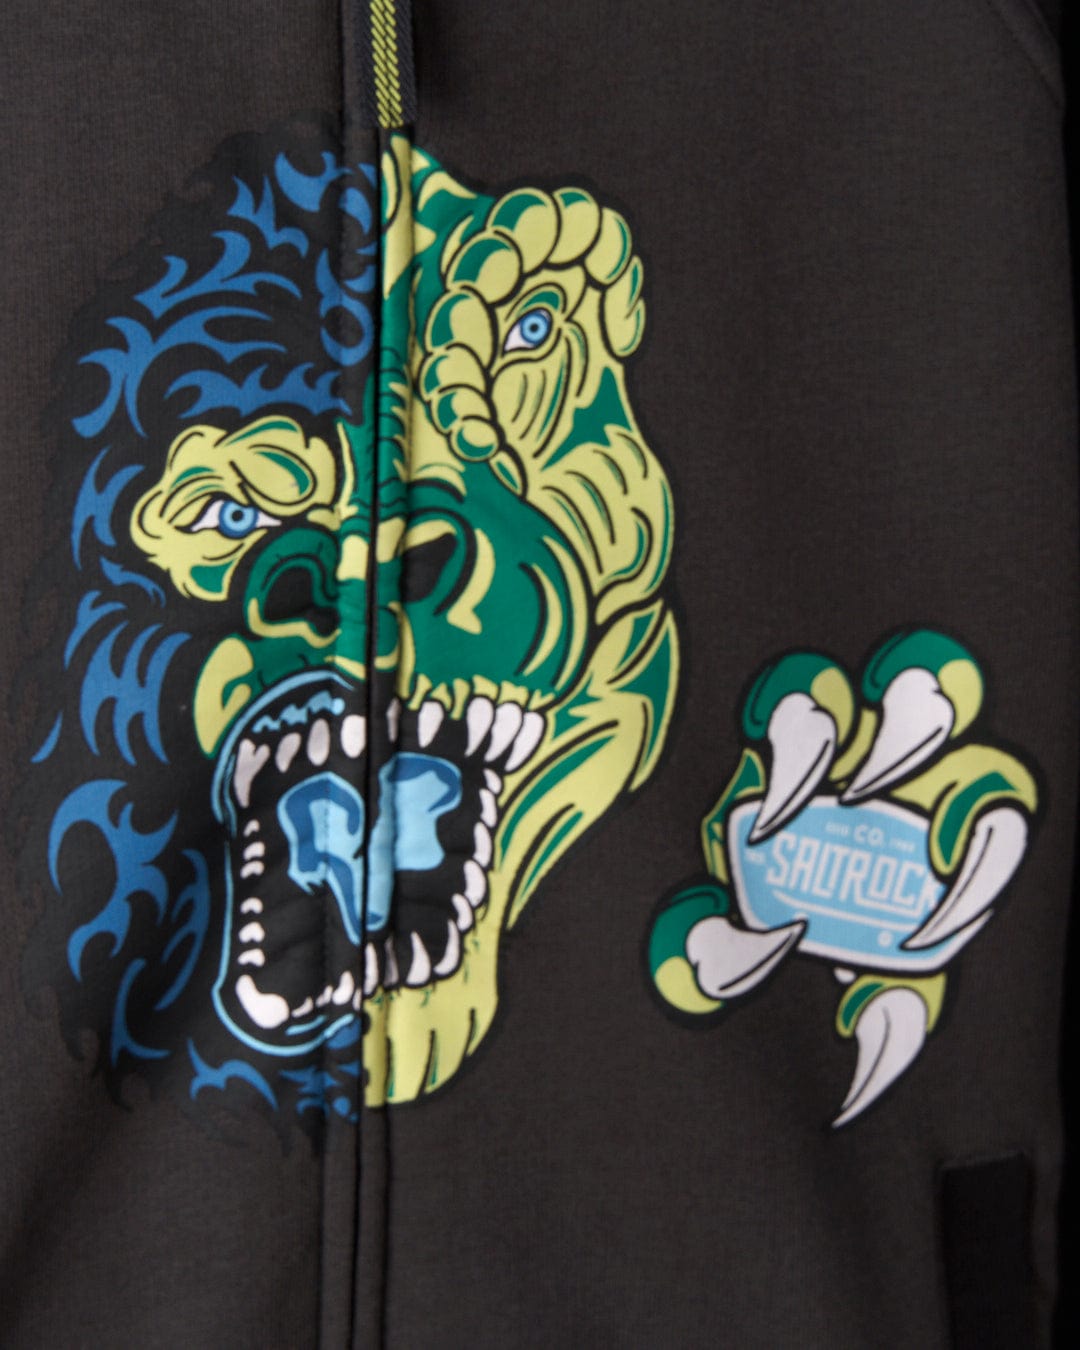 A close-up image of a Las Vegas Smackdown - Recycled Oversized Kids Zip Hoodie - Black by Saltrock featuring an artistic design of a half-blue, half-green roaring gorilla's head and a claw holding a badge with text that reads "Saltrock." The glowing graphics are made from recycled materials, adding an eco-friendly touch.